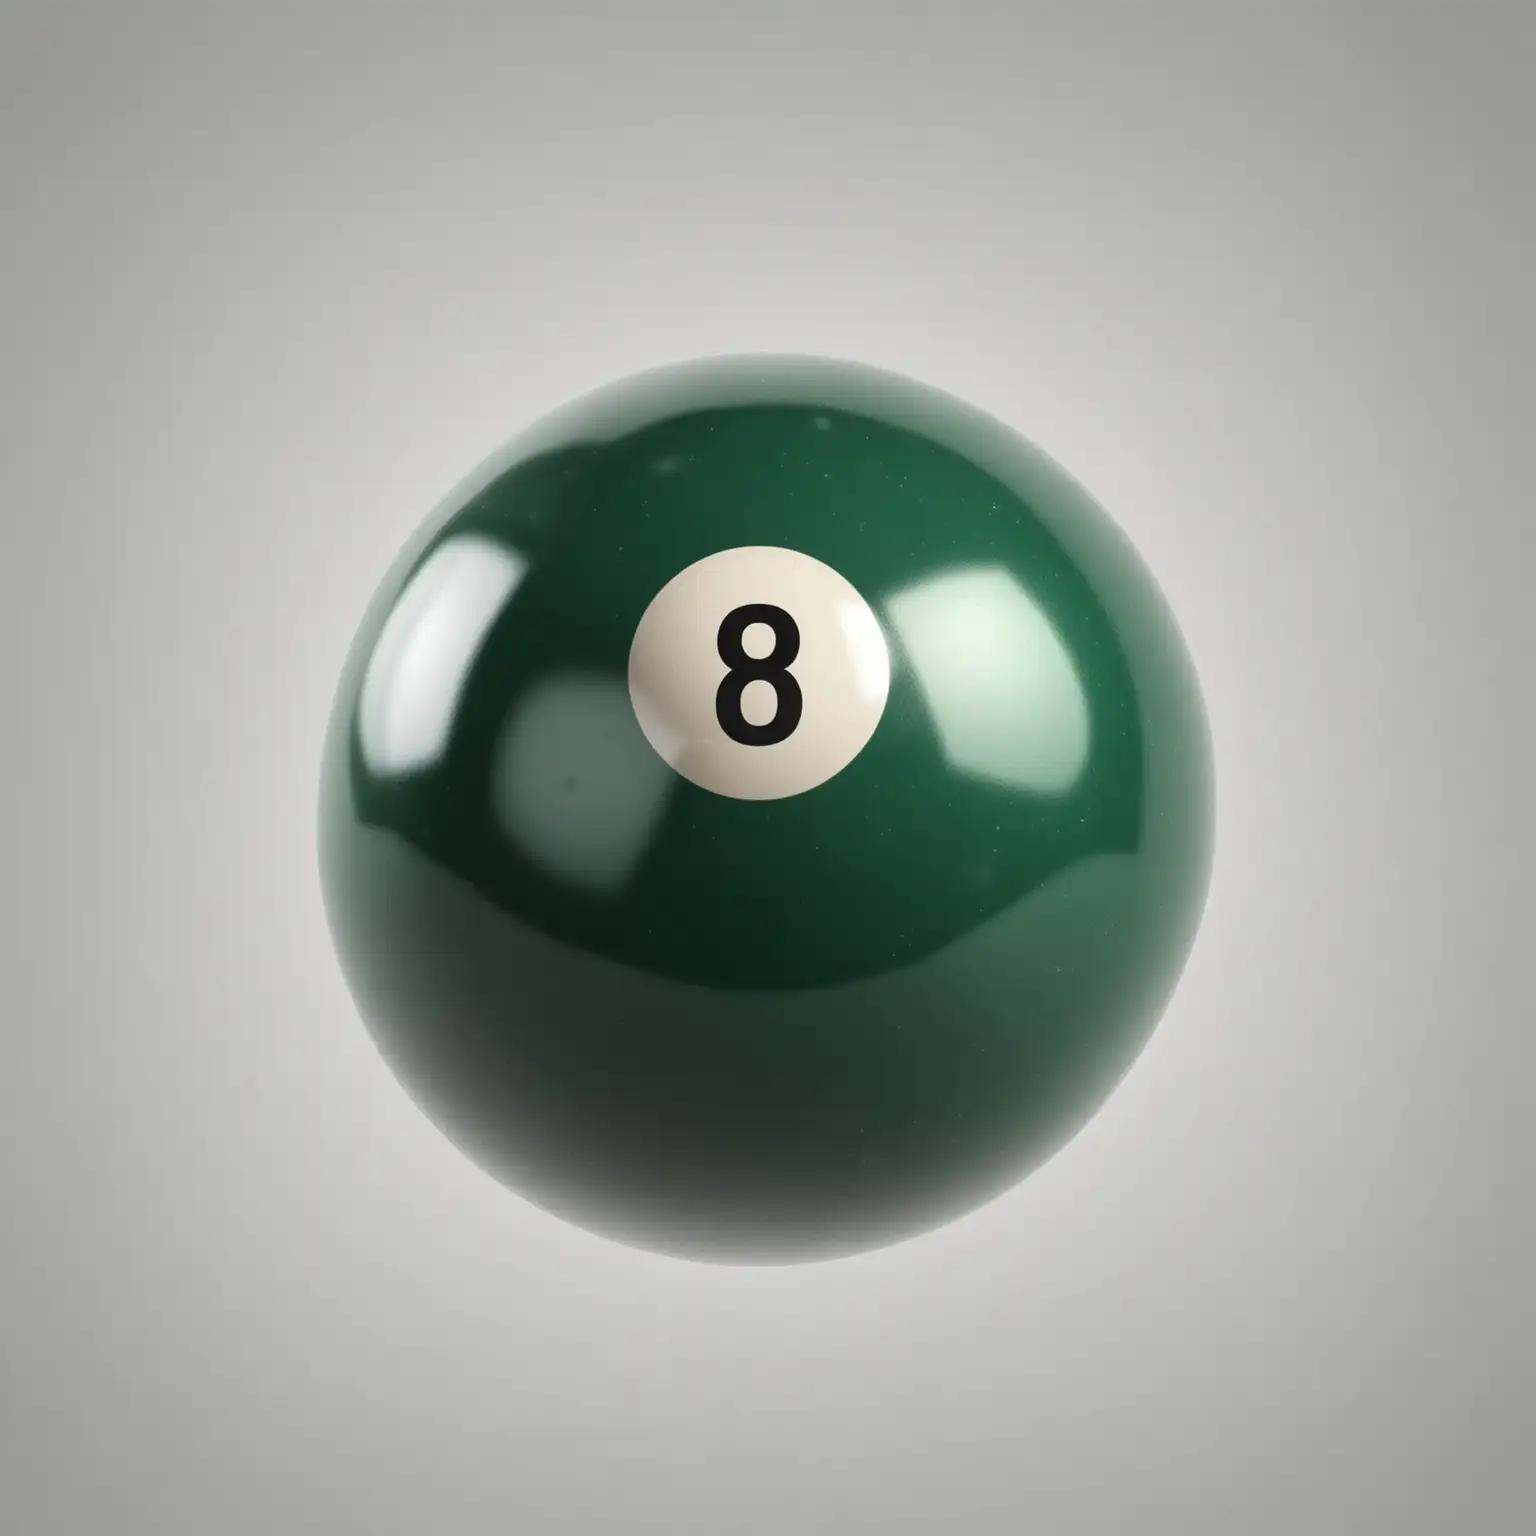 Hyper Realistic Dark Green Billiard Ball Number 6 Isolated on White Background